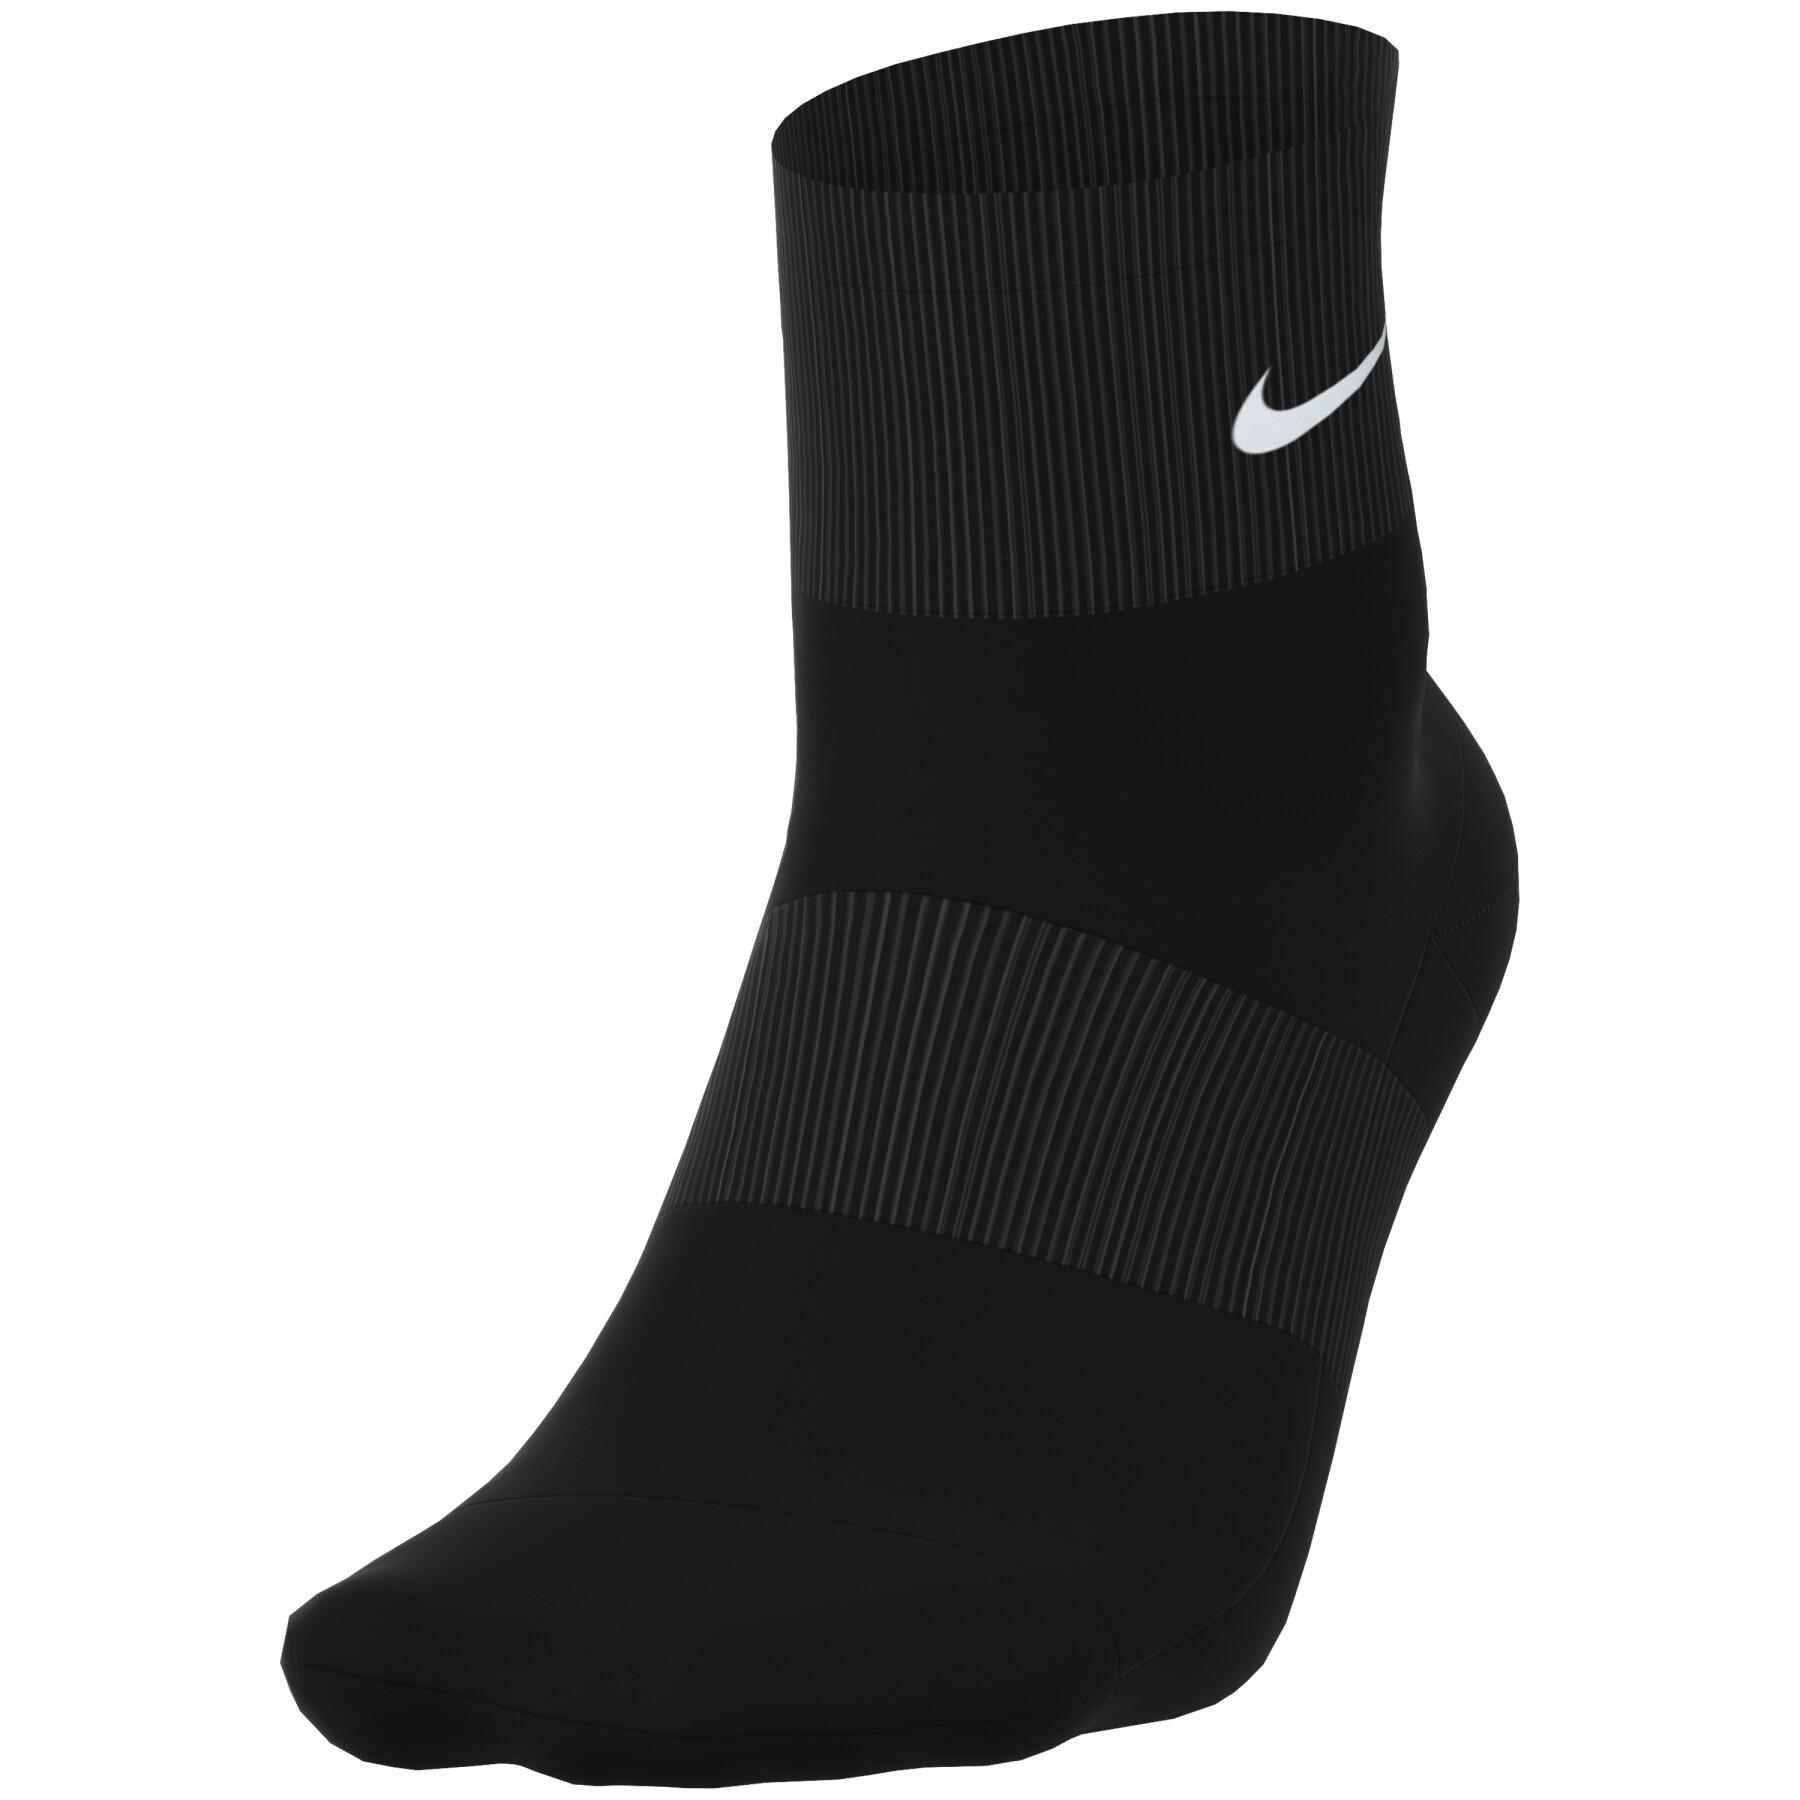 Chaussettes Nike nsw everyday essential - Nike - Marques - Equipements